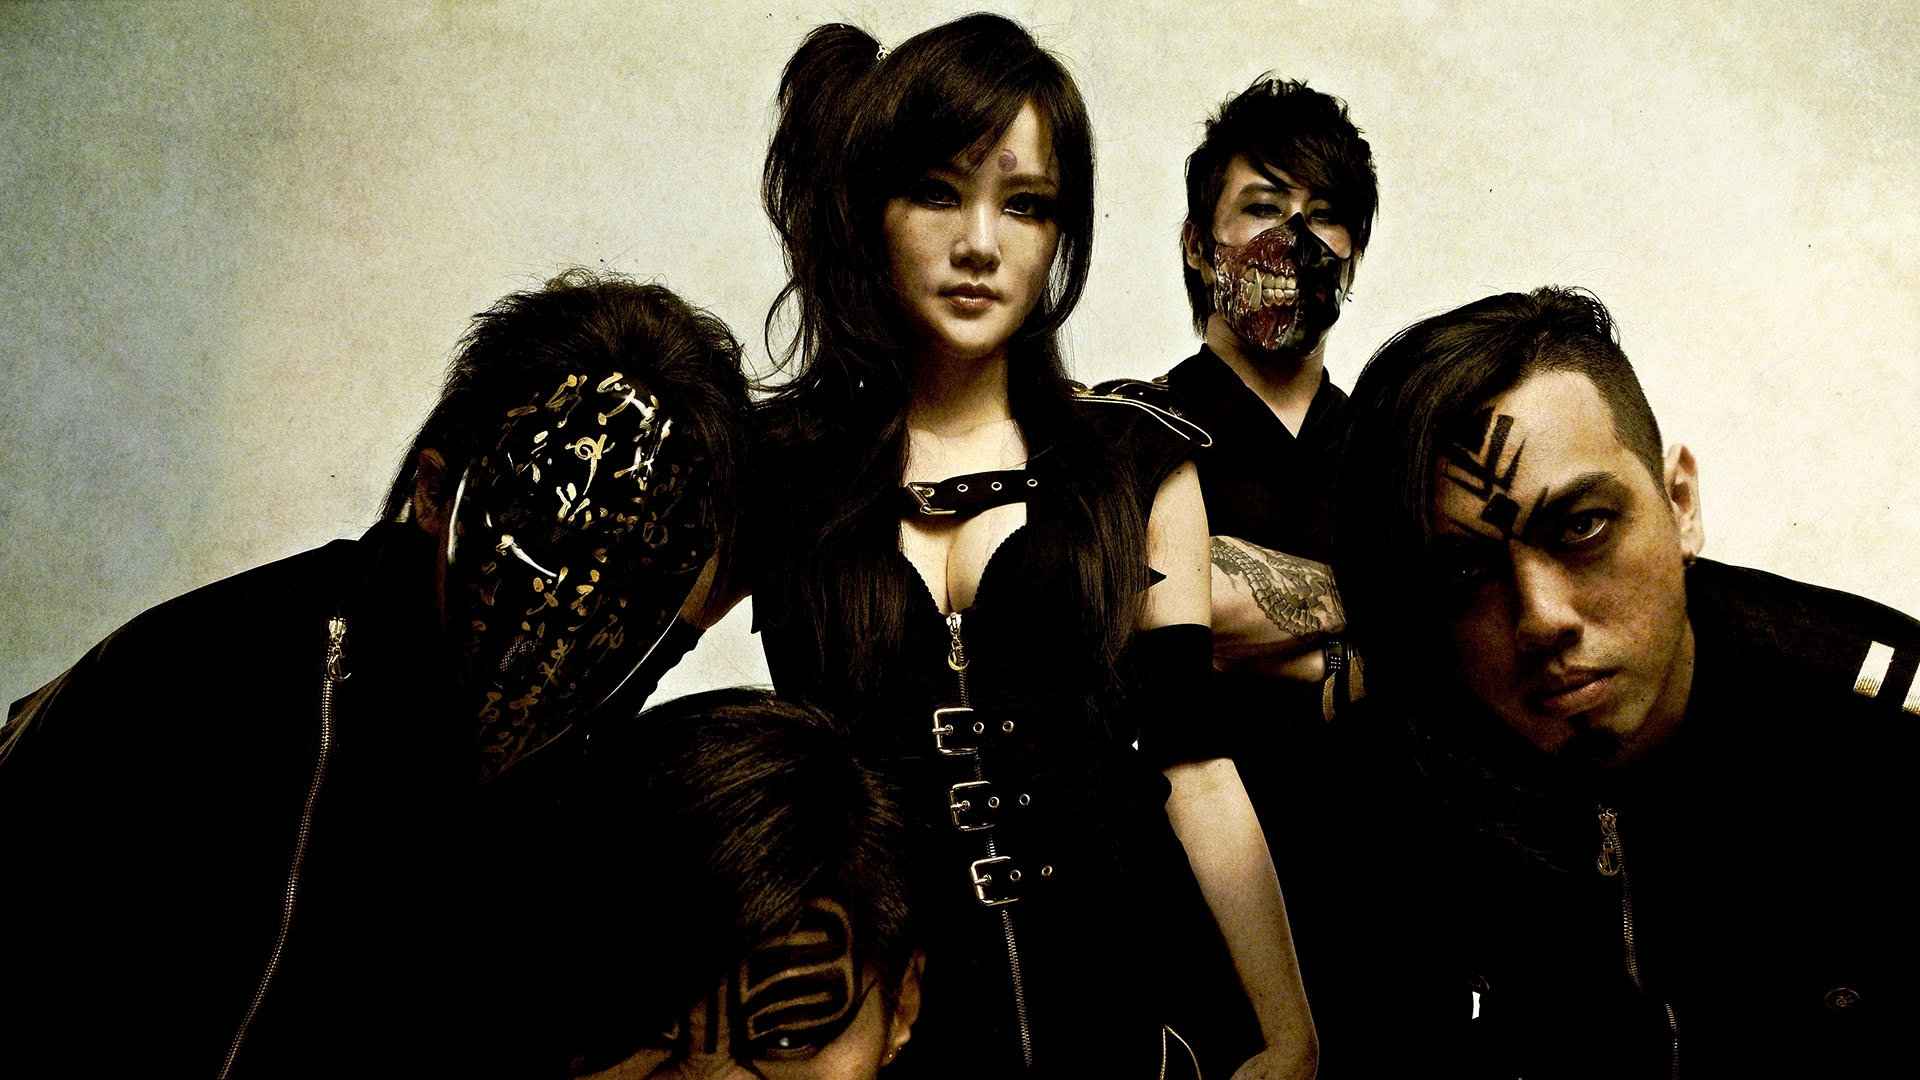 Download mobile wallpaper Chthonic, Music for free.